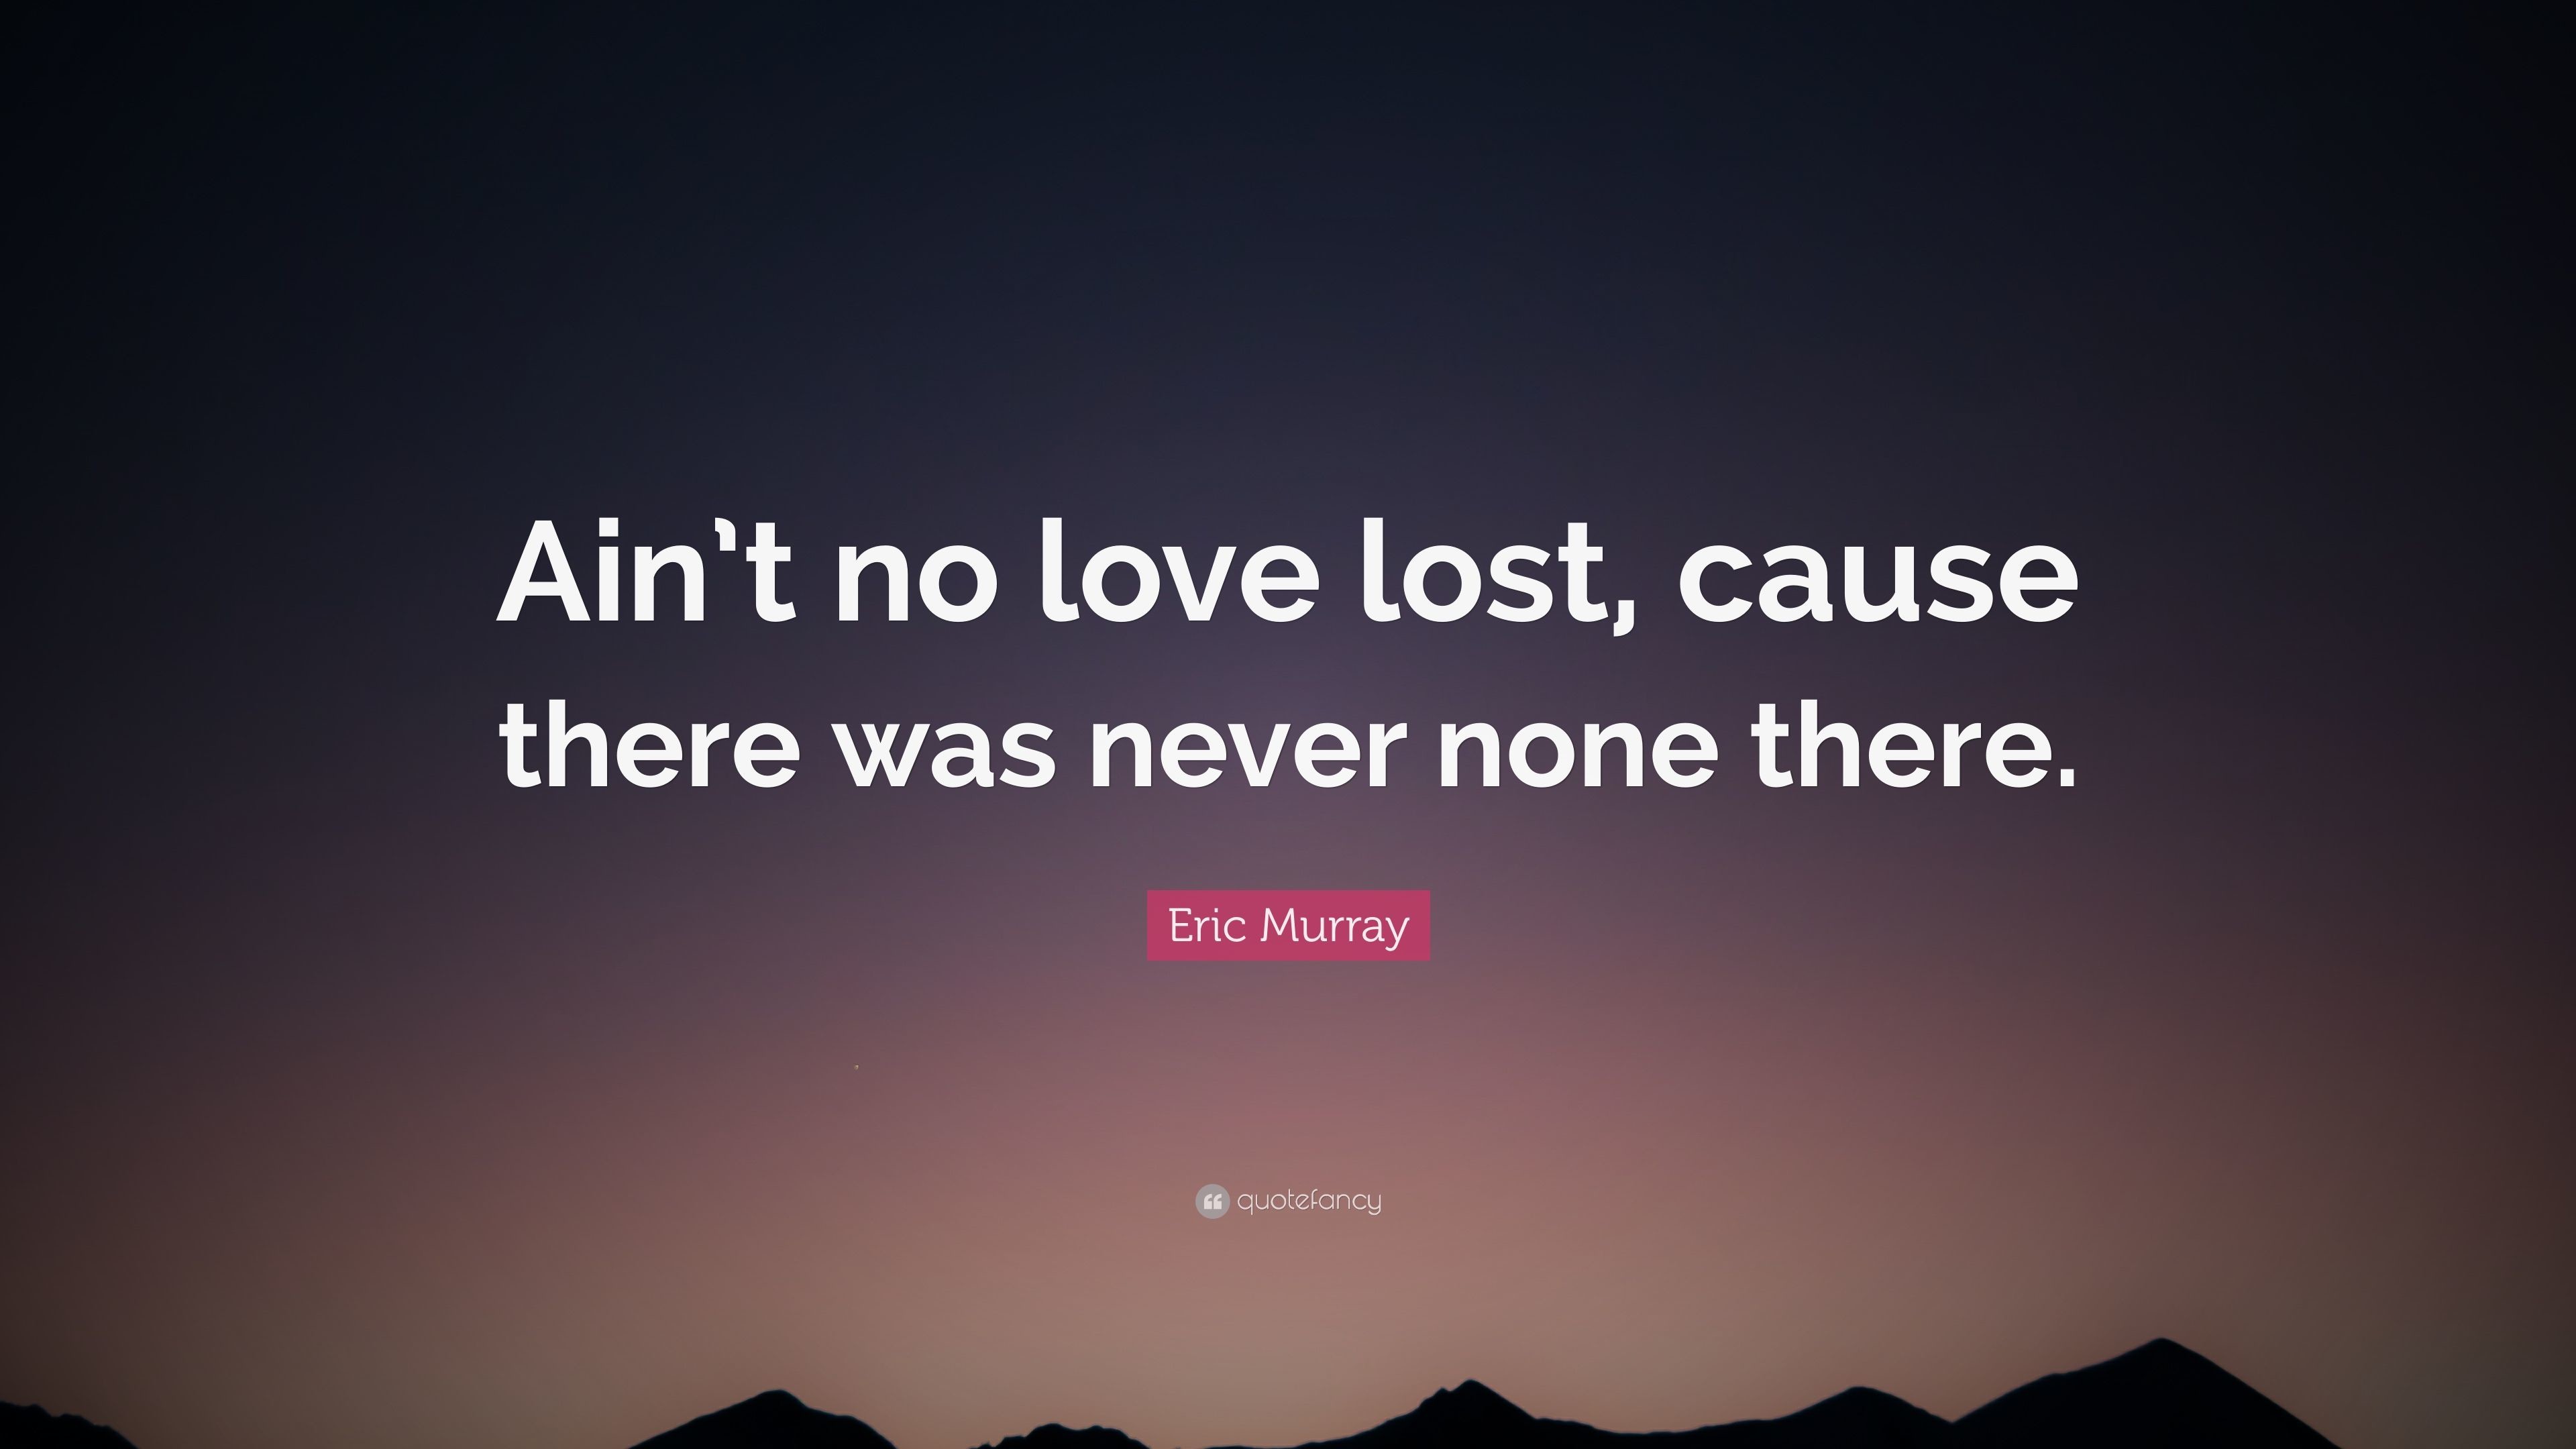 3840x2160 Eric Murray Quote: “Ain't no love lost, cause there was never